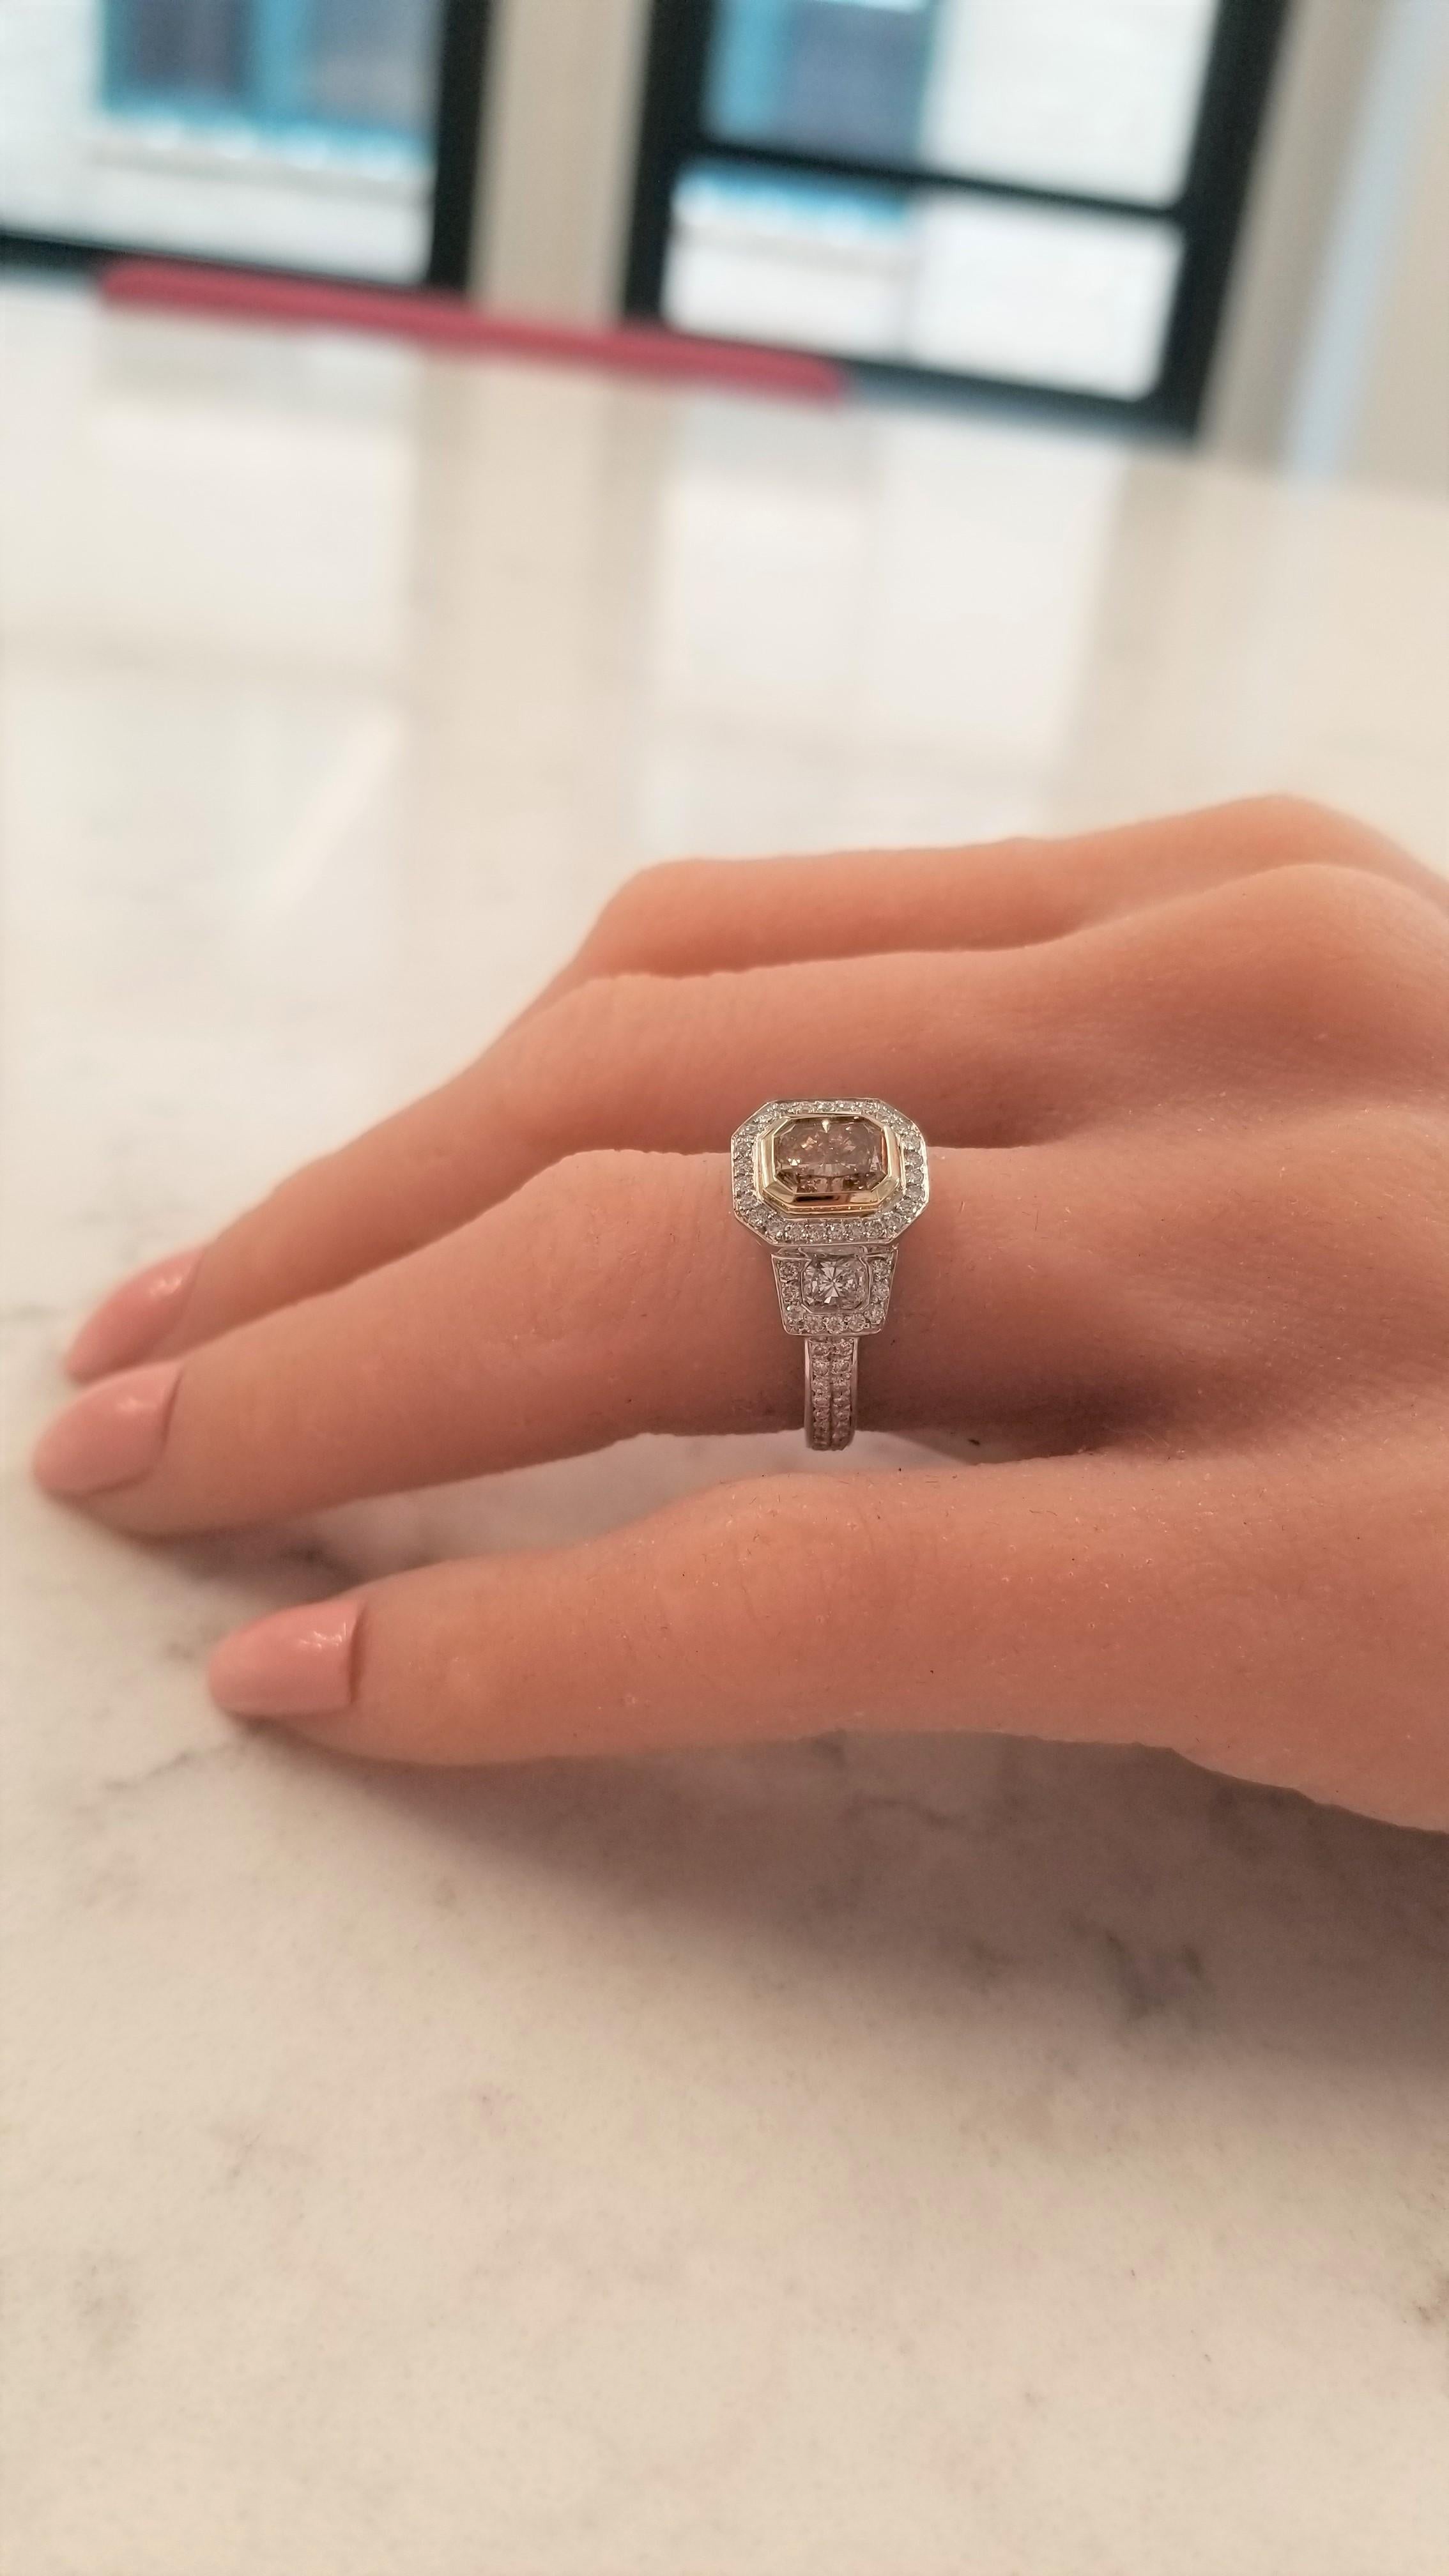 This is an incredible piece of fine jewelry! Platinum and yellow gold are the dynamic duo that make this piece sing. This stunner features a 1.20 carat radiant-cut natural cinnamon diamond center in an 18k yellow gold frame. It is cleverly enhanced